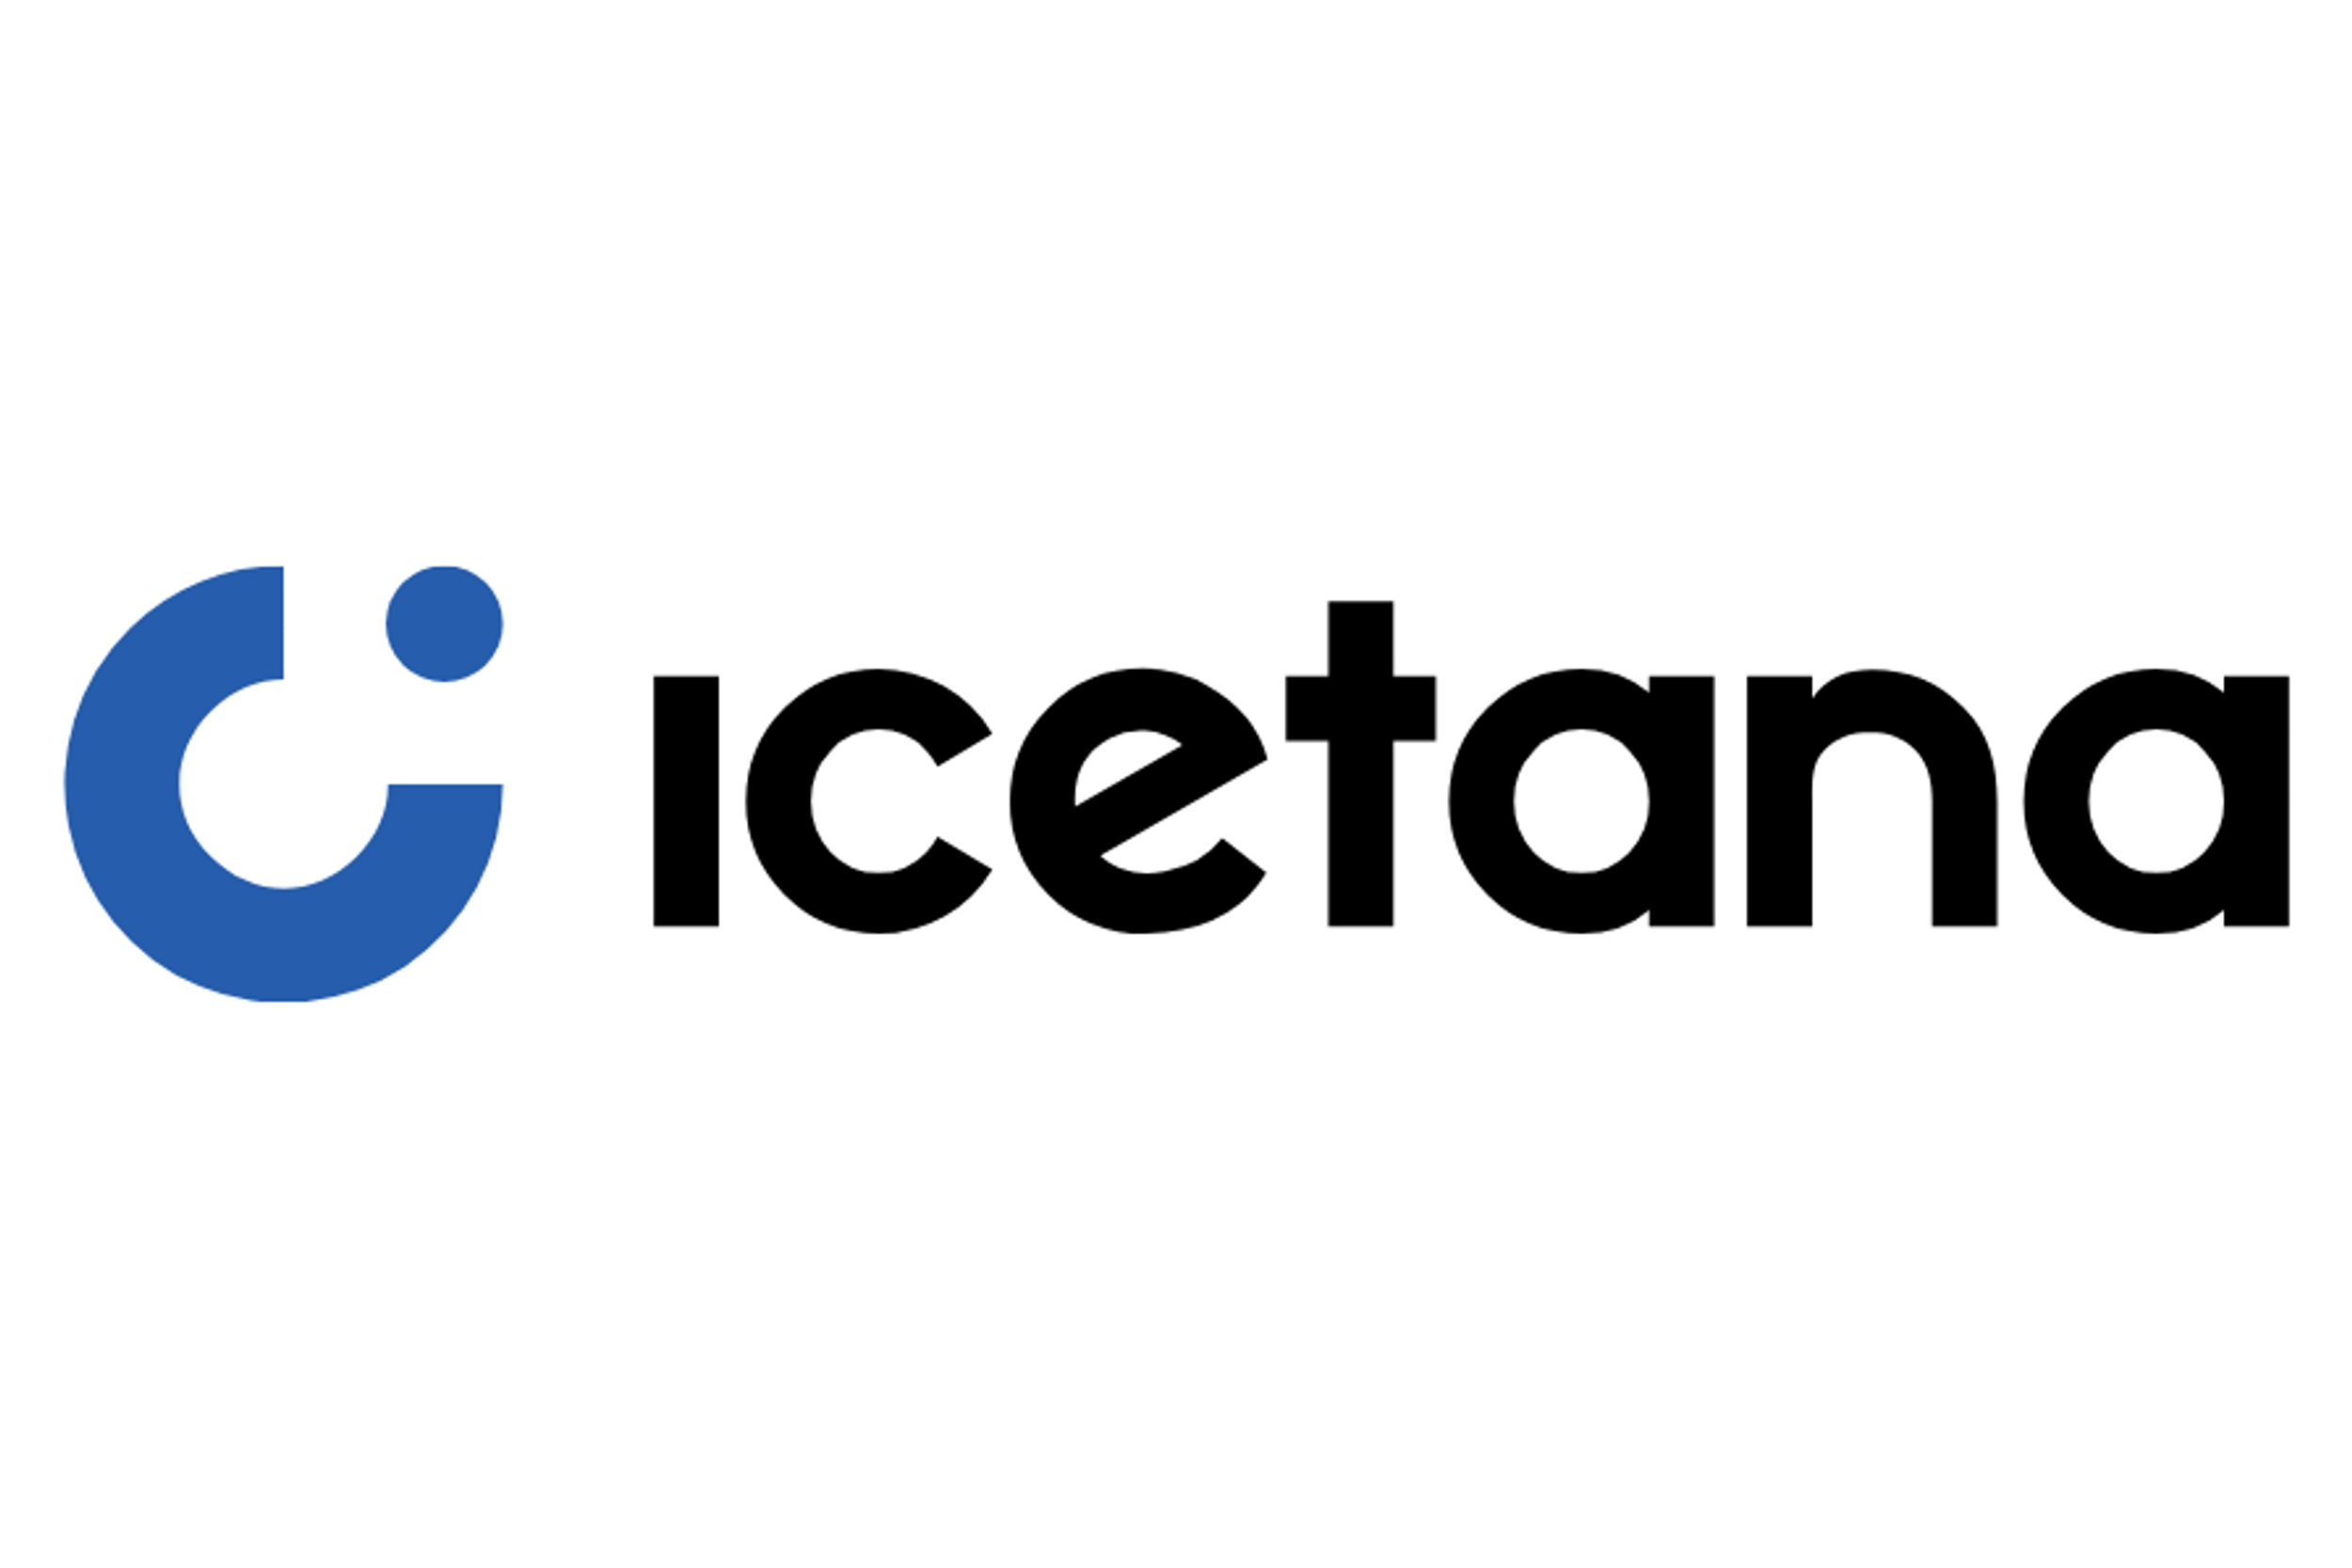 icetana’s Largest Customer Extends Contract and Receives First South America Order